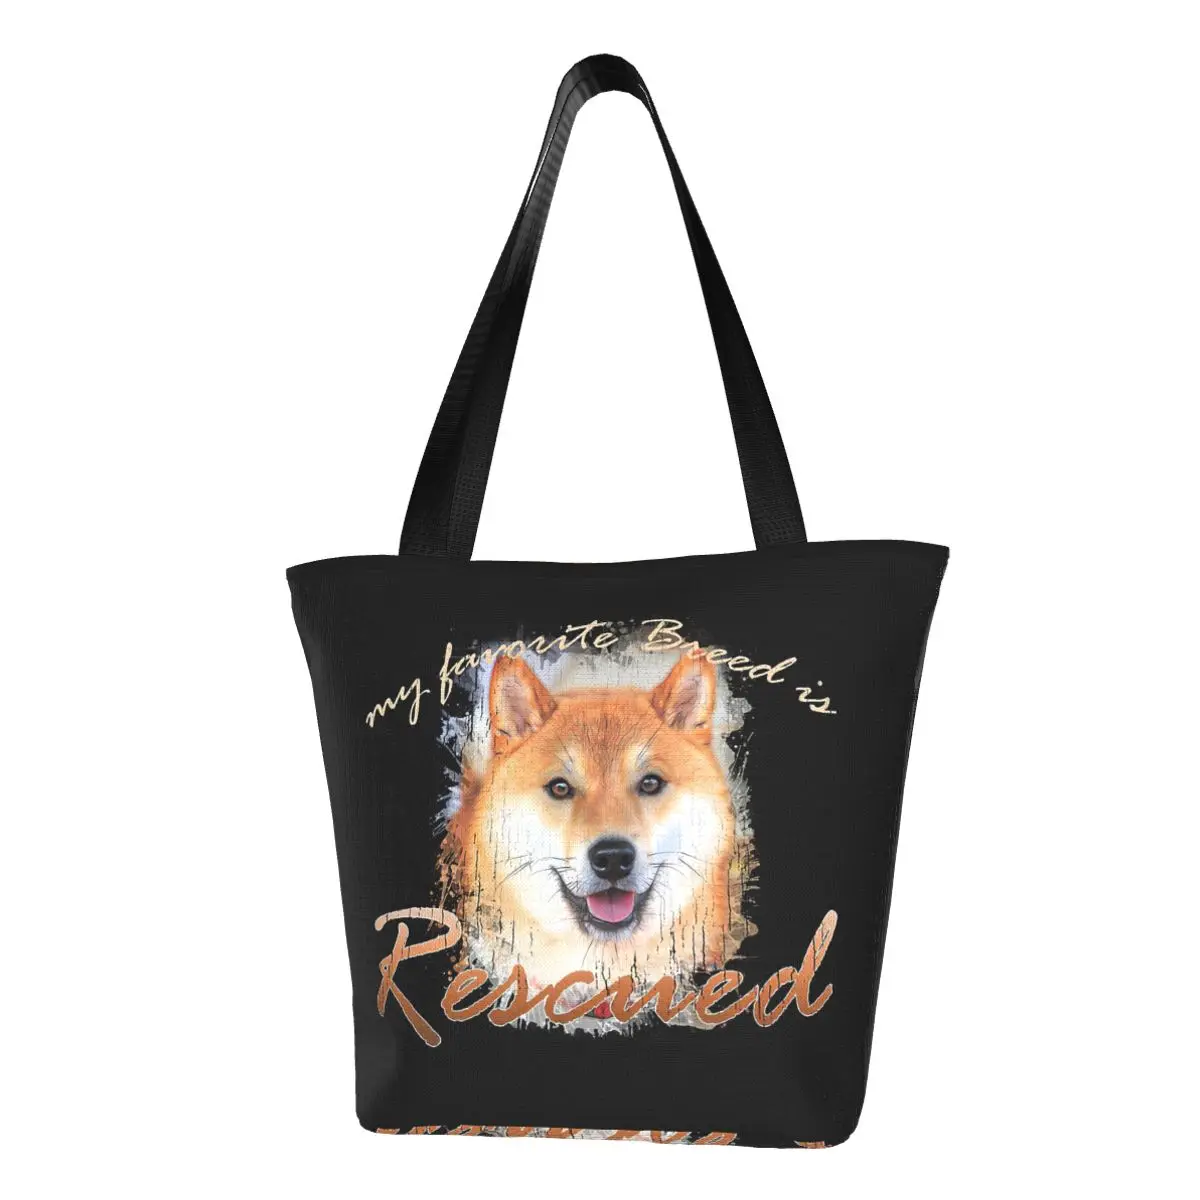 My Favorite Breed Is Rescued Watercolor Shopping Bag Aesthetic Cloth Outdoor Handbag Female Fashion Bags